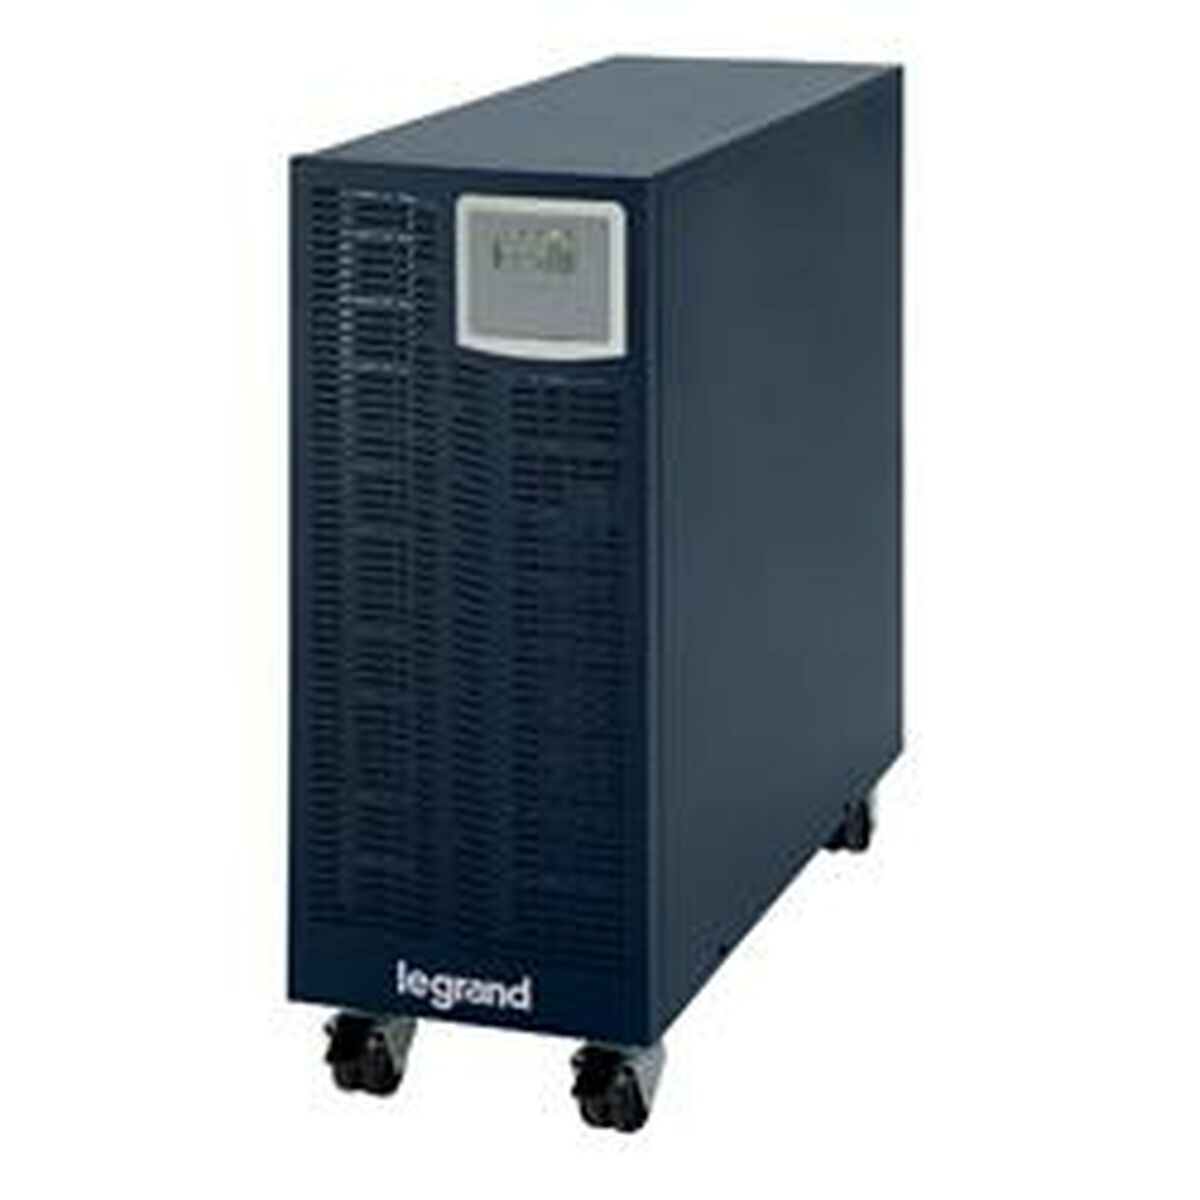 Uninterruptible Power Supply System Interactive UPS Legrand LG-310121 2400 W 3000 VA, Legrand, Computing, Accessories, uninterruptible-power-supply-system-interactive-ups-legrand-lg-310121-2400-w-3000-va, Brand_Legrand, category-reference-2609, category-reference-2642, category-reference-2845, category-reference-t-19685, category-reference-t-19908, category-reference-t-21341, computers / peripherals, Condition_NEW, office, Price_+ 1000, Teleworking, RiotNook